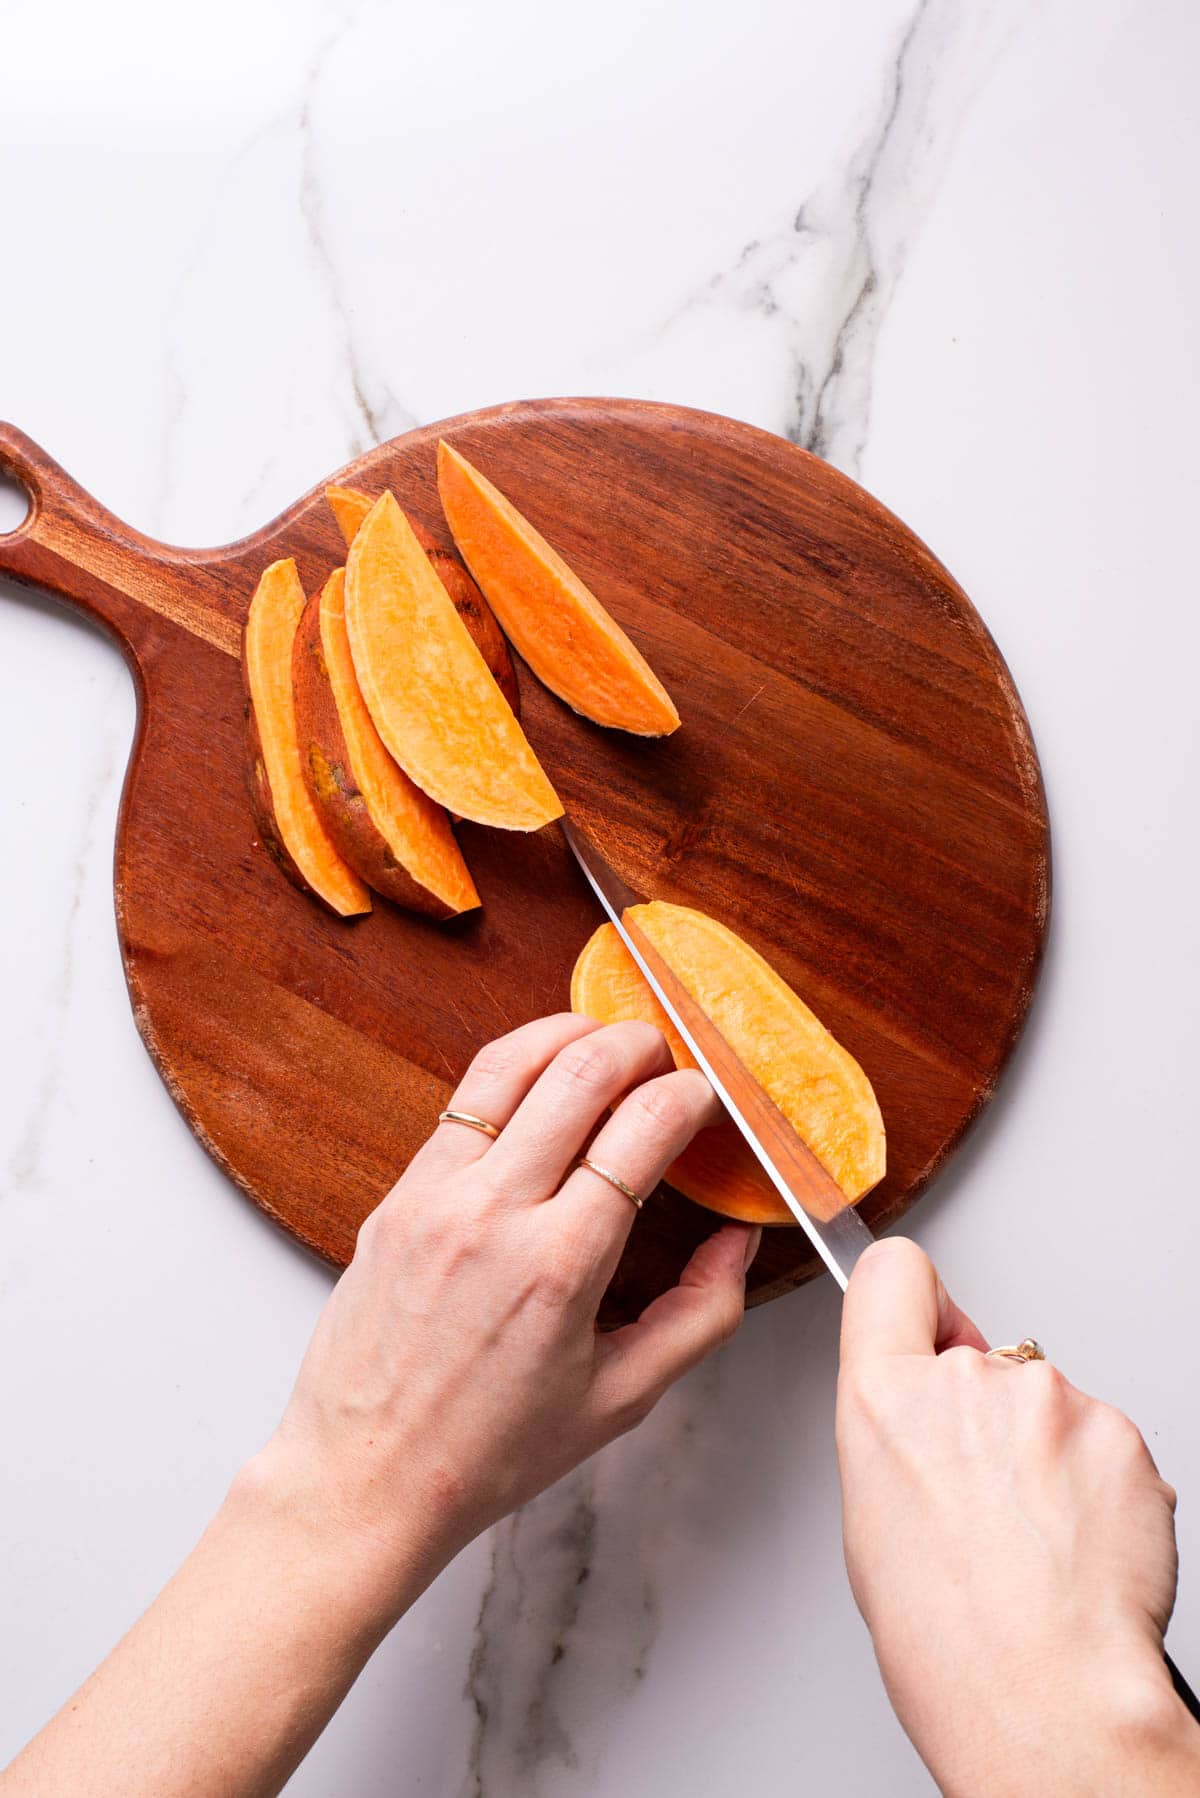 Cutting sweet potatoes into wedges.